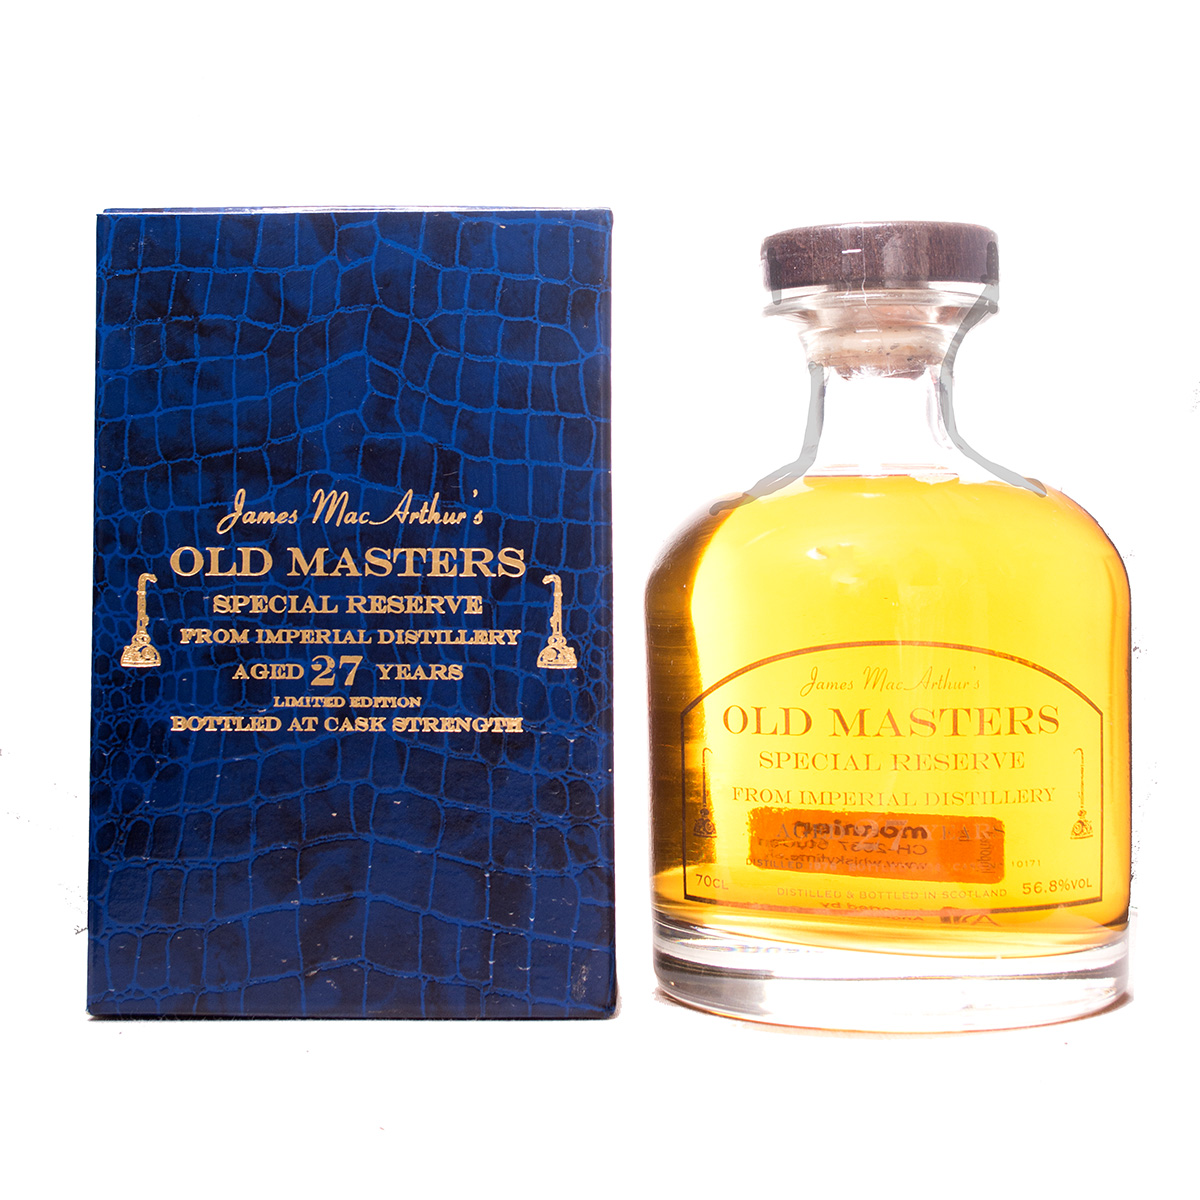 OLD MASTERS 27 YEARS